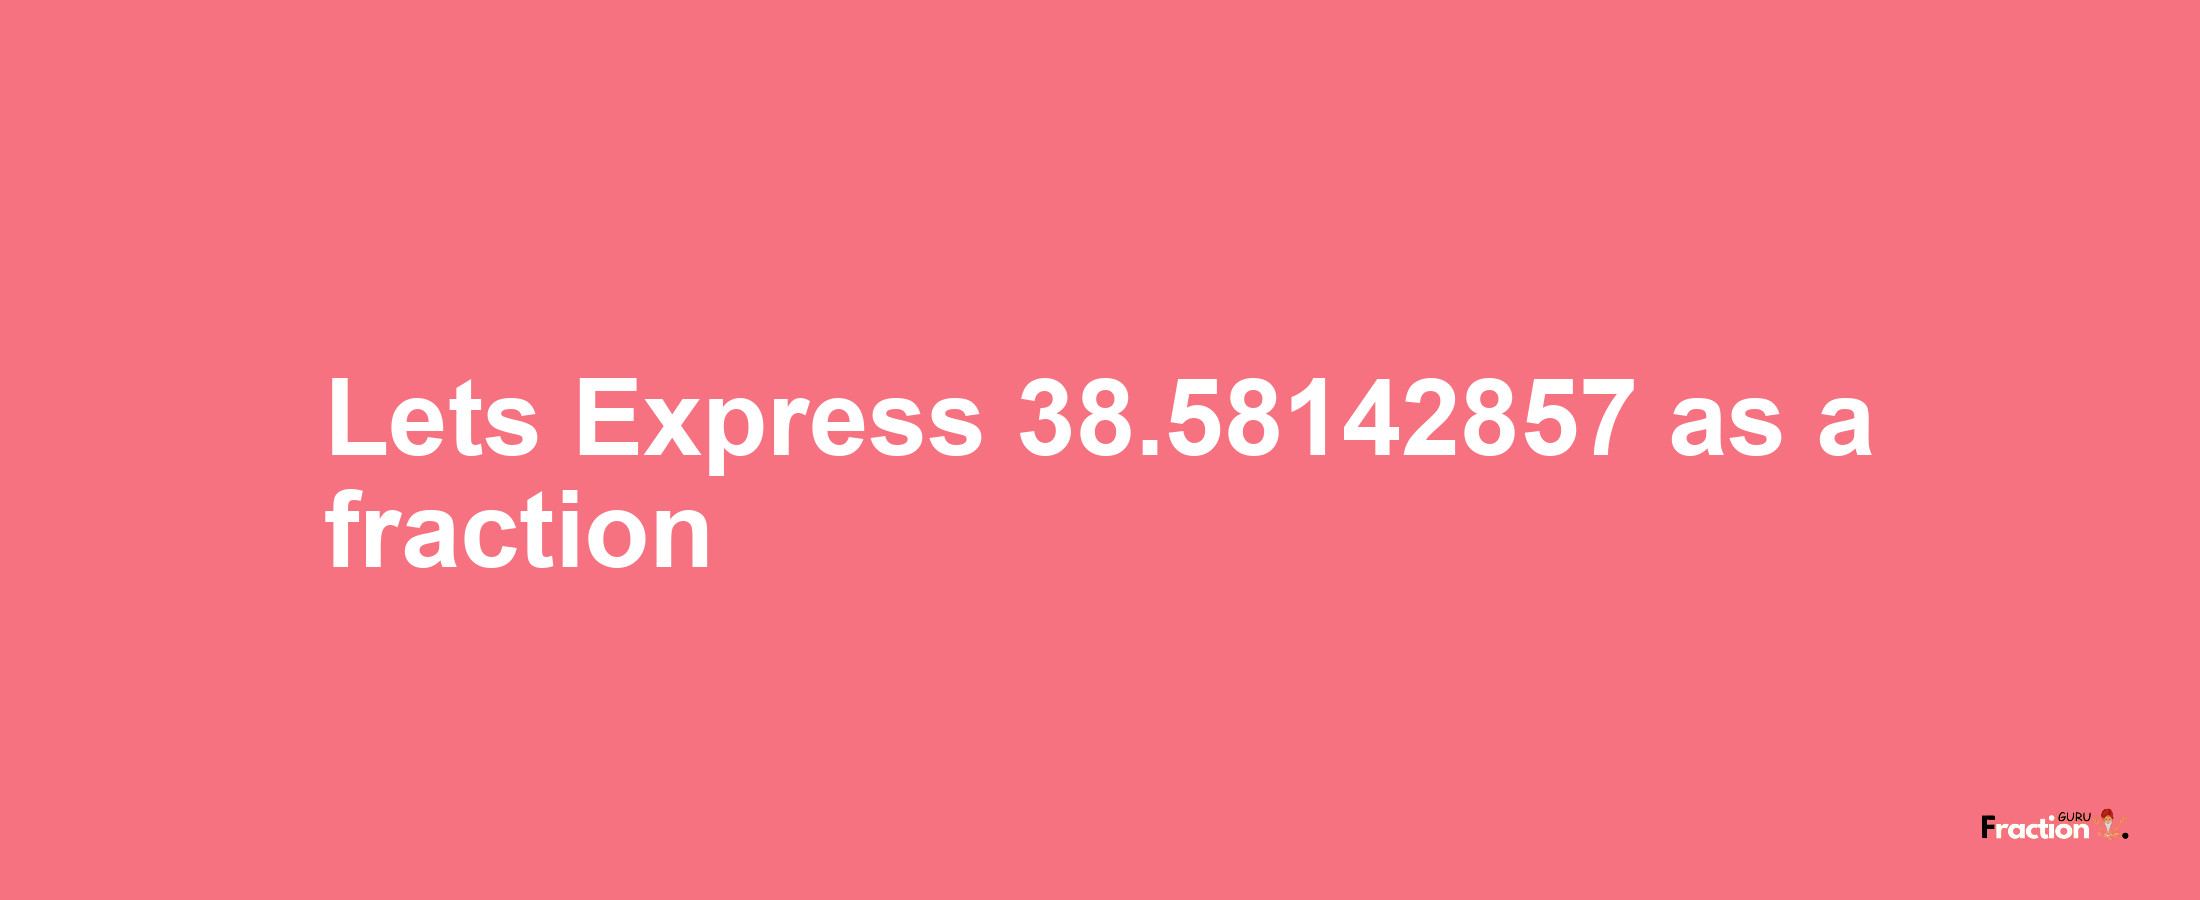 Lets Express 38.58142857 as afraction